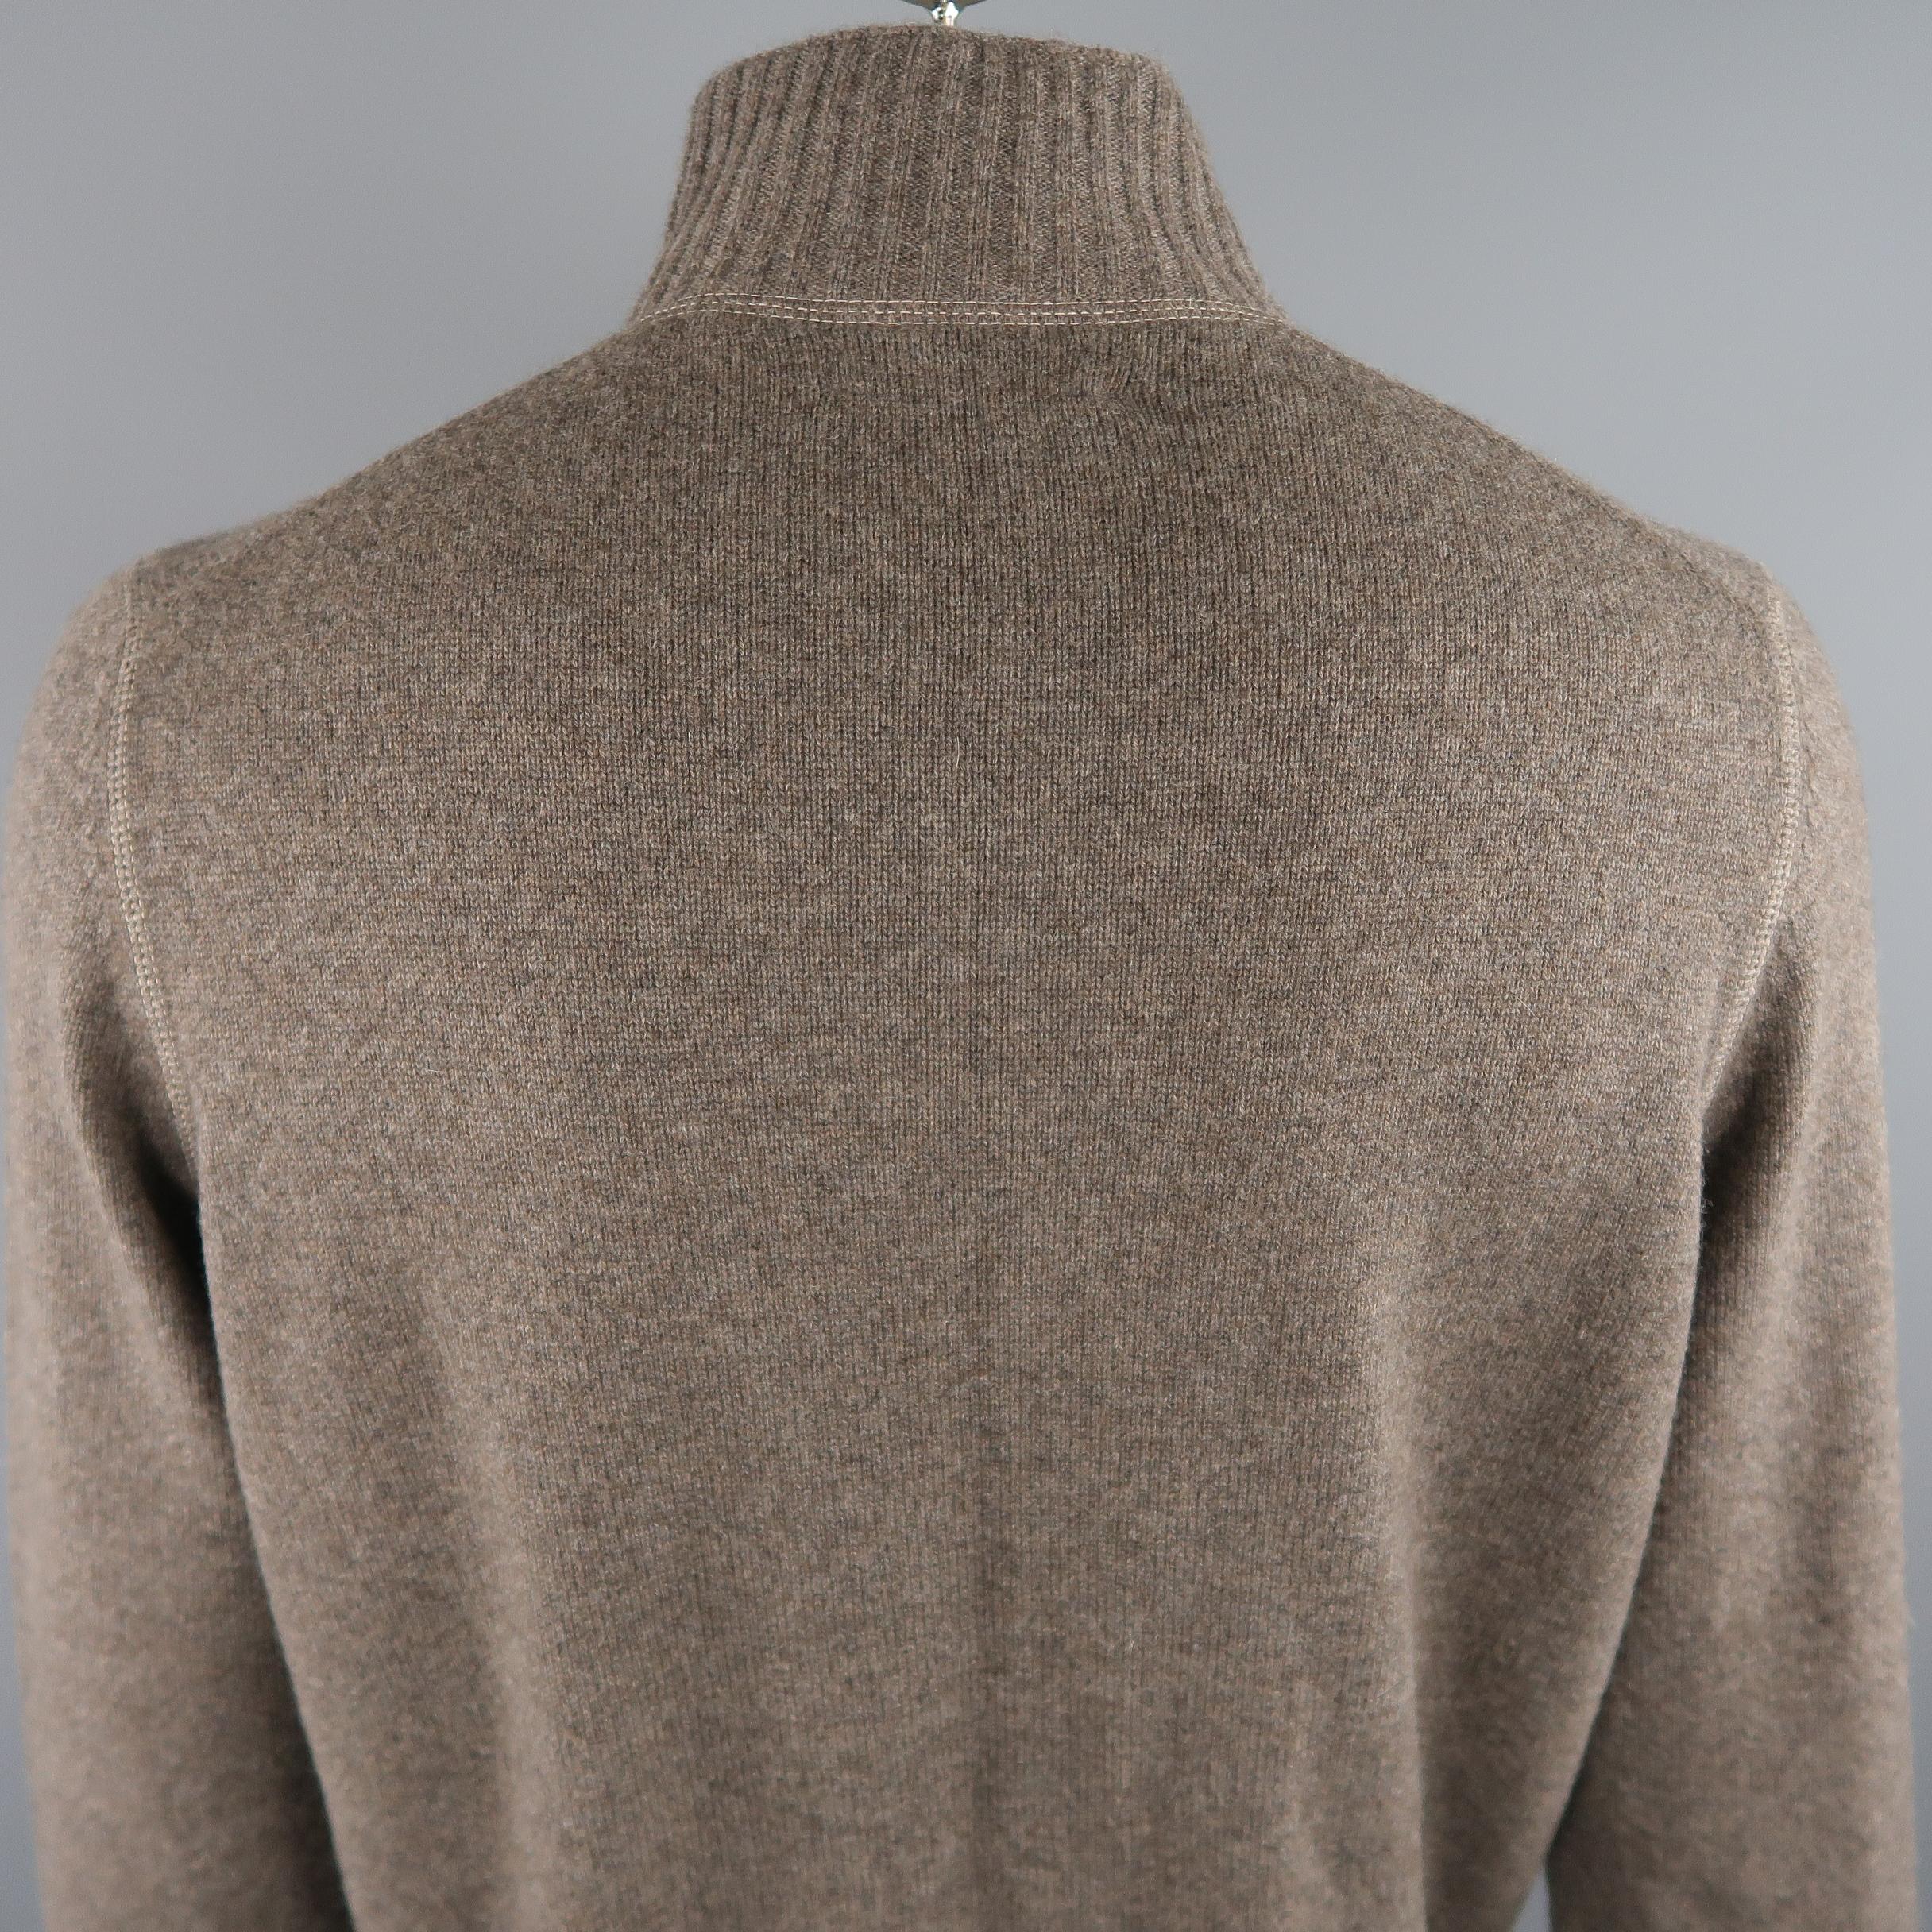 Men's BRUNELLO CUCINELLI Size 44 Taupe Knitted Cashmere Buttoned High Collar Sweater